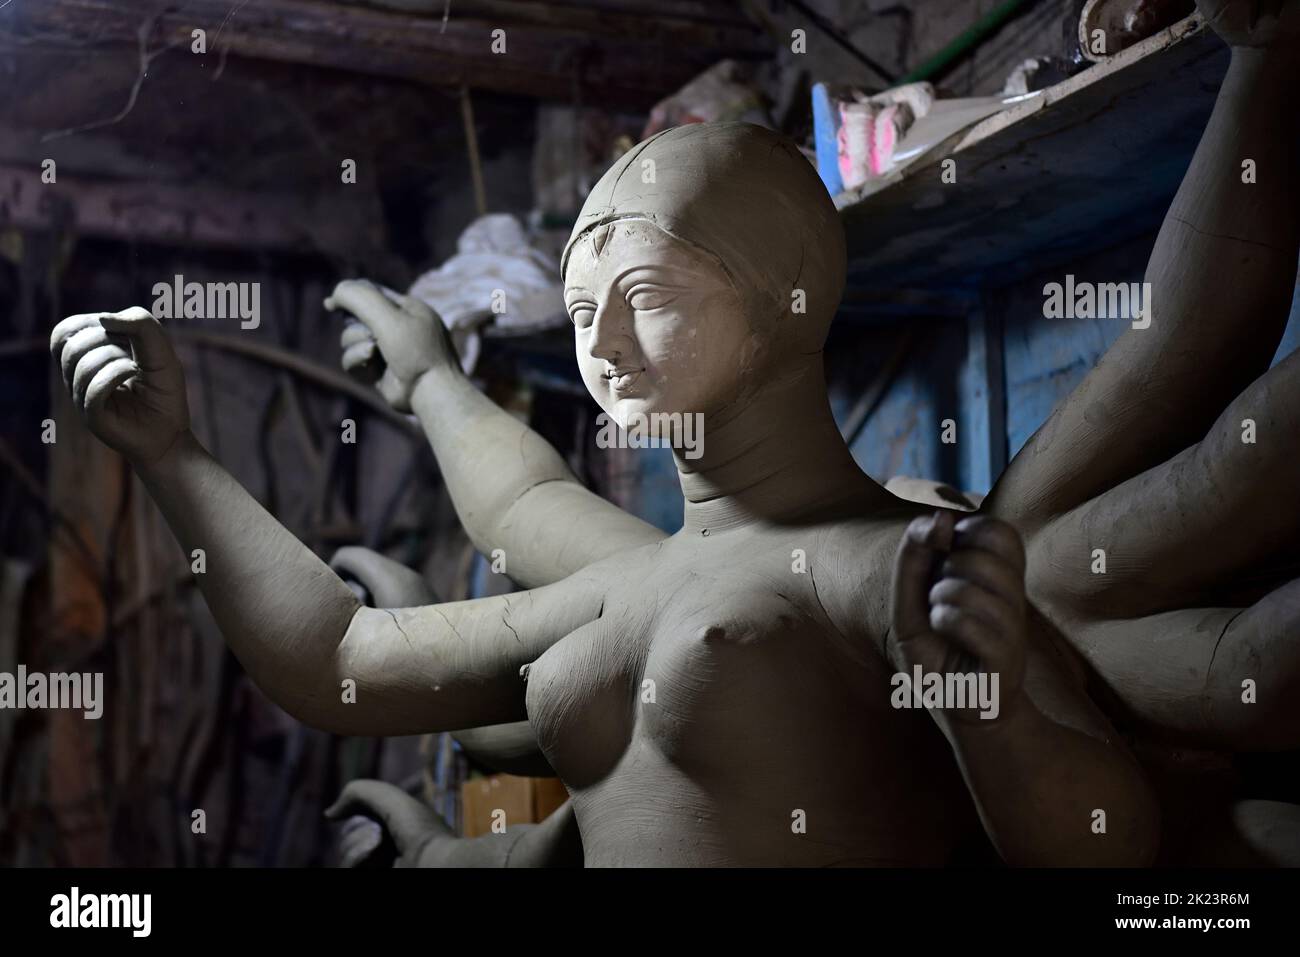 Goddess idols are being prepared with clay before festival. Idols being made for Durga Puja festival. Stock Photo